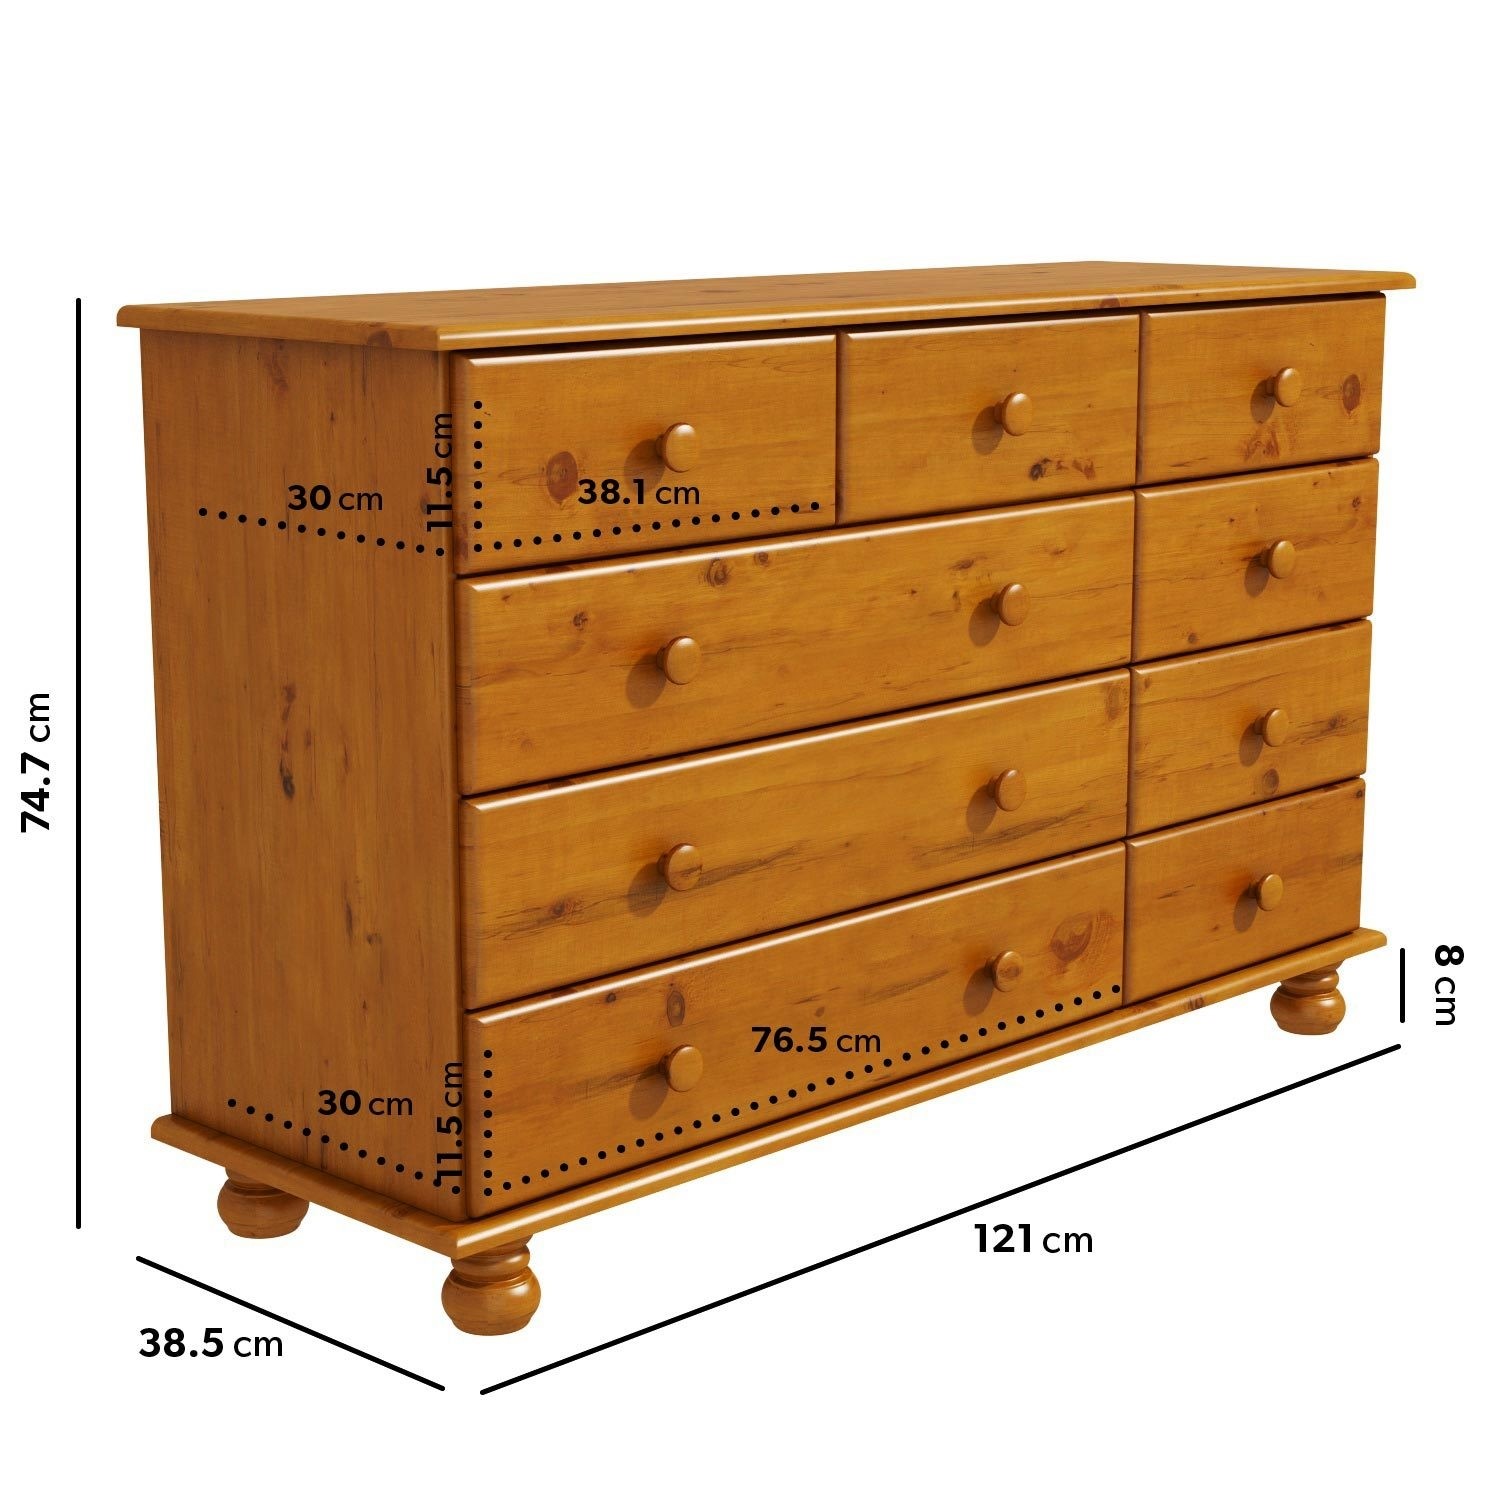 Read more about Wide pine chest of 9 drawers hamilton